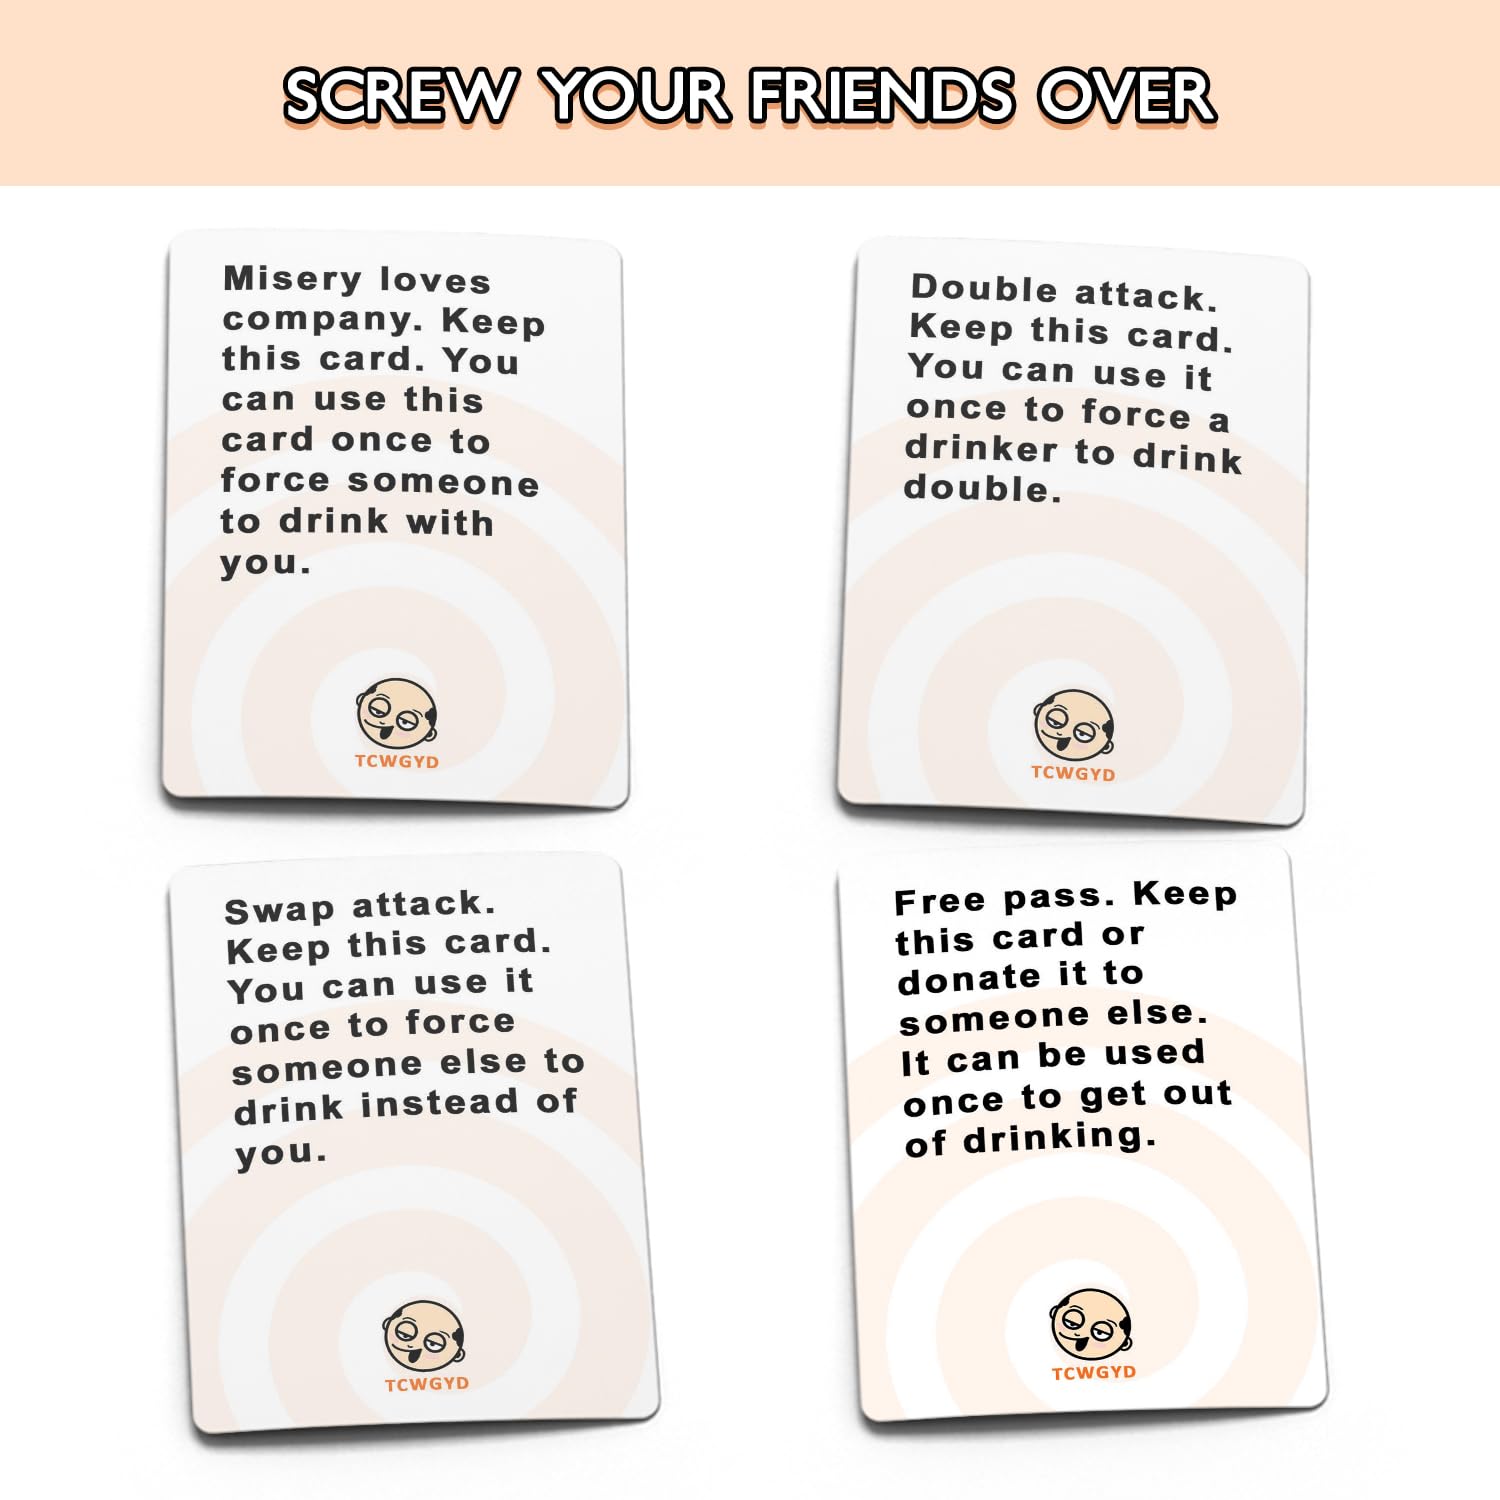 These Cards Will Get You Drunk - Fun Adult Drinking Game for Parties